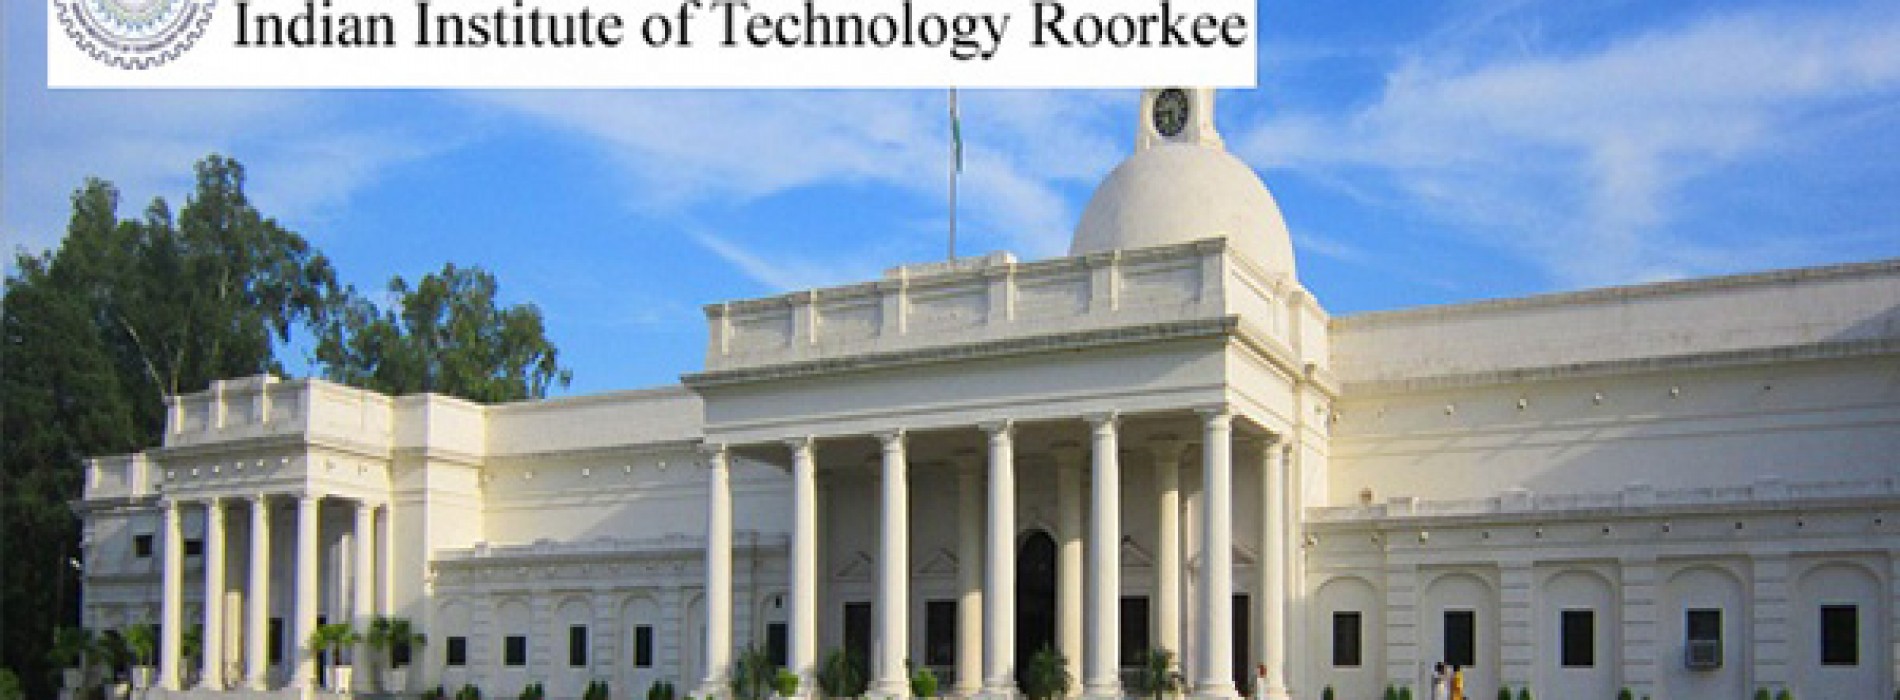 IIT Roorkee is developing drones to make your train journey safer